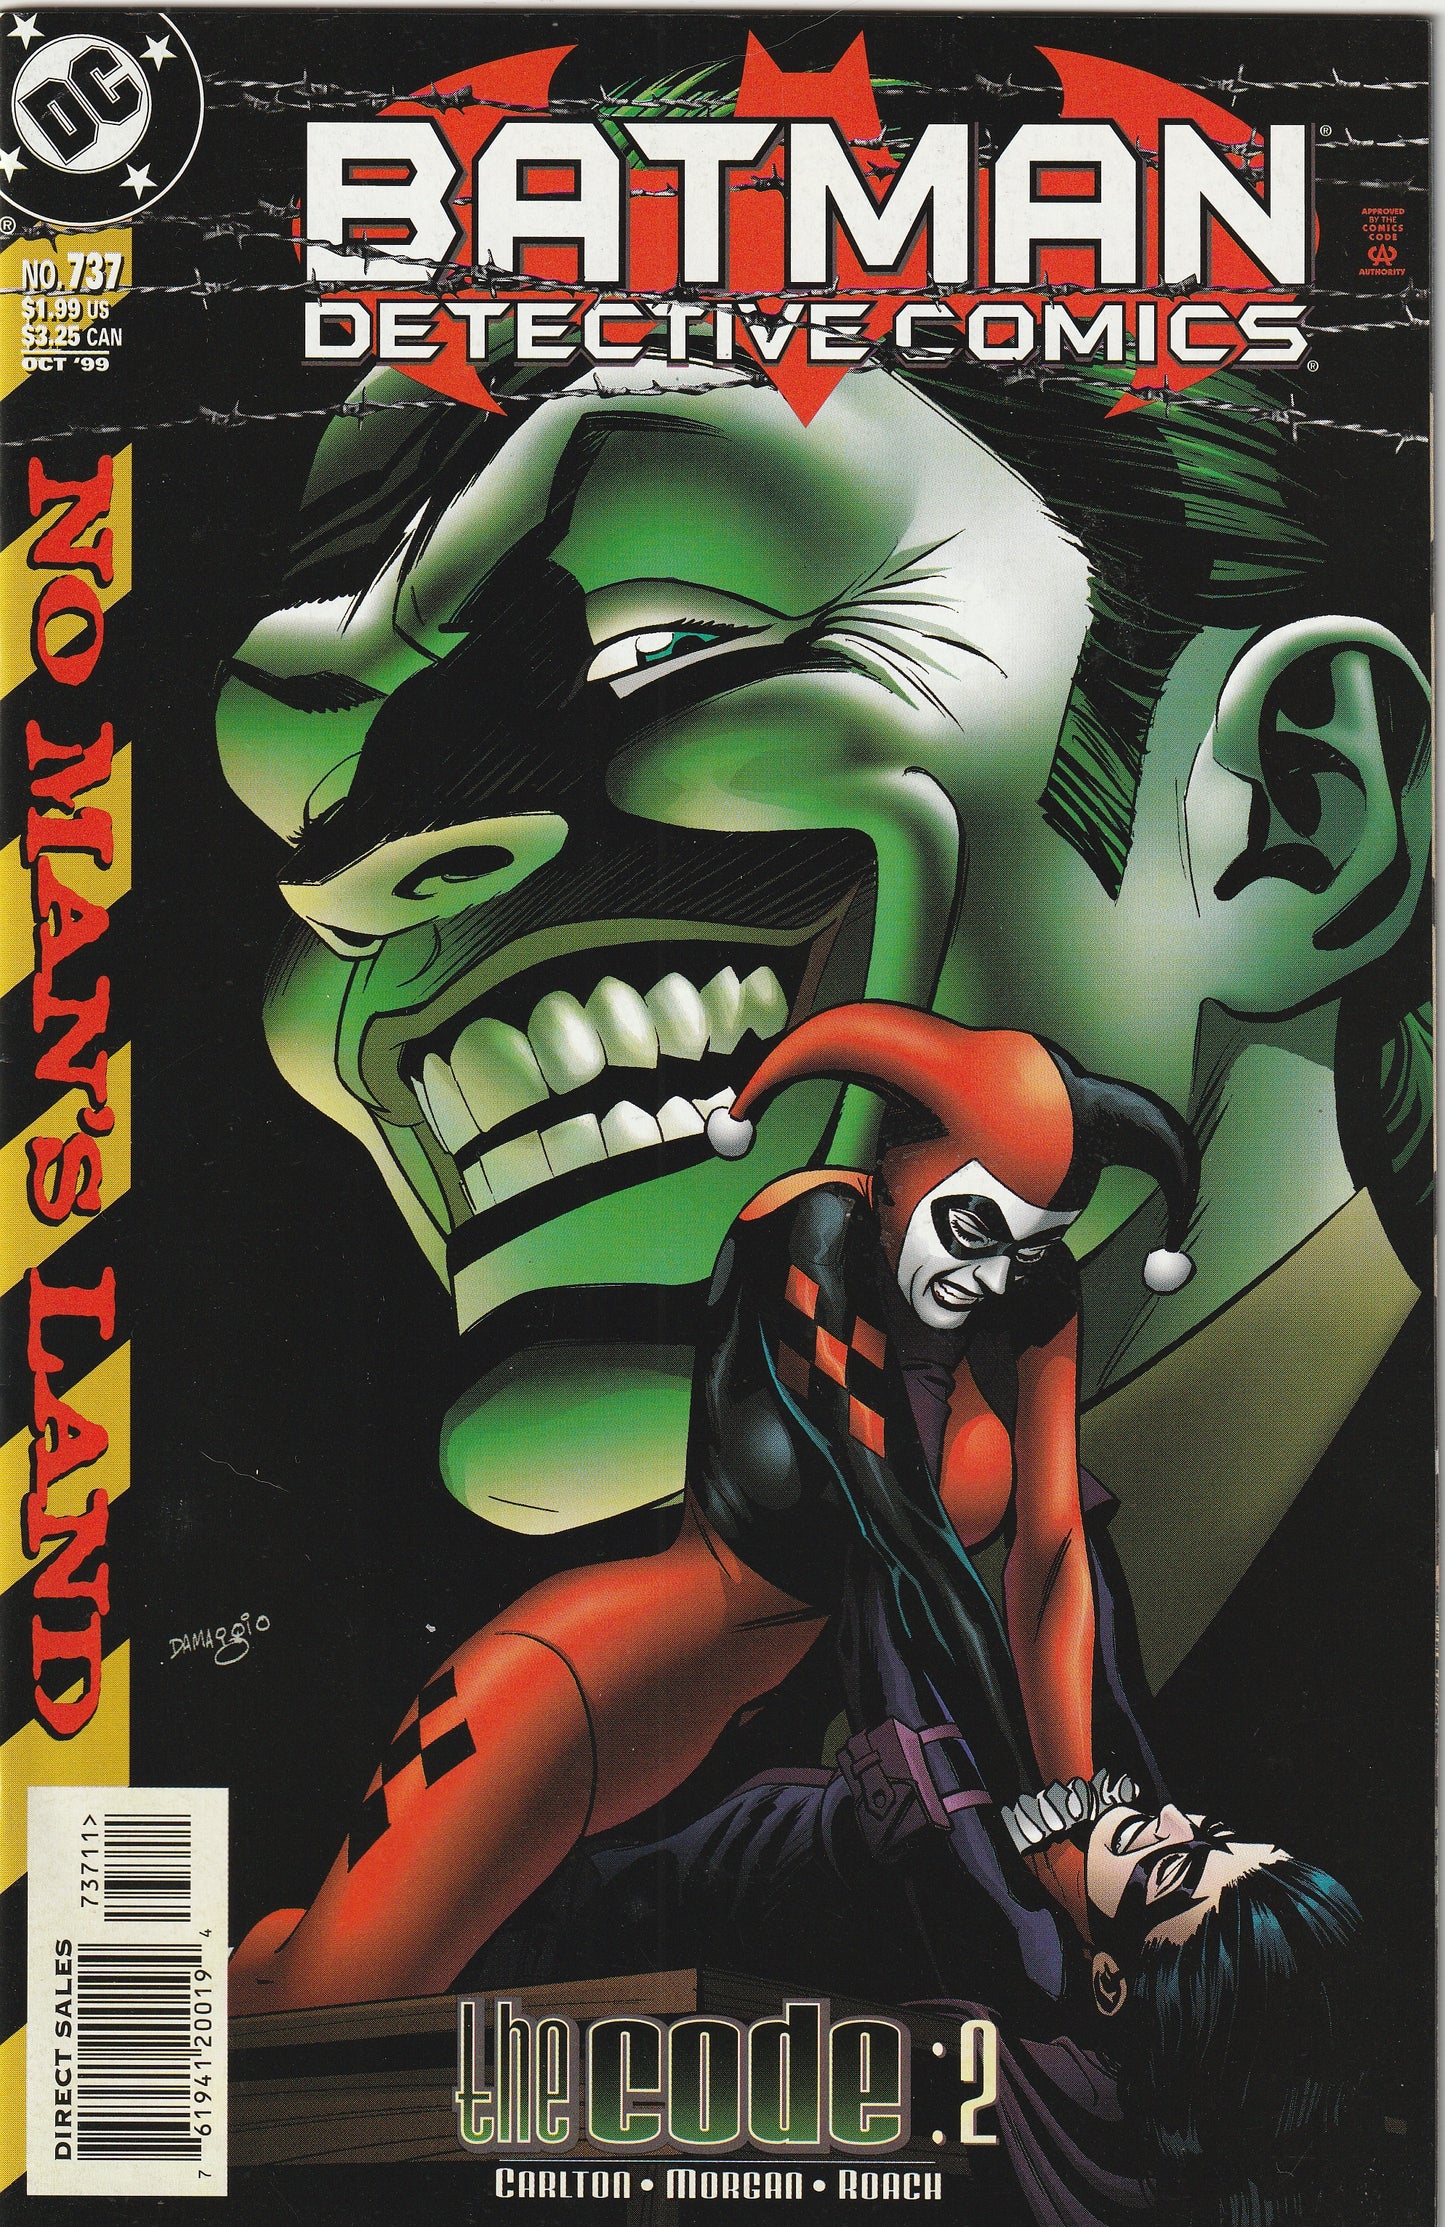 Detective Comics #737 (1999) - No Man's Land - 3rd appearance of Harley Quinn (Harleen Quinzel) in the regular DCU